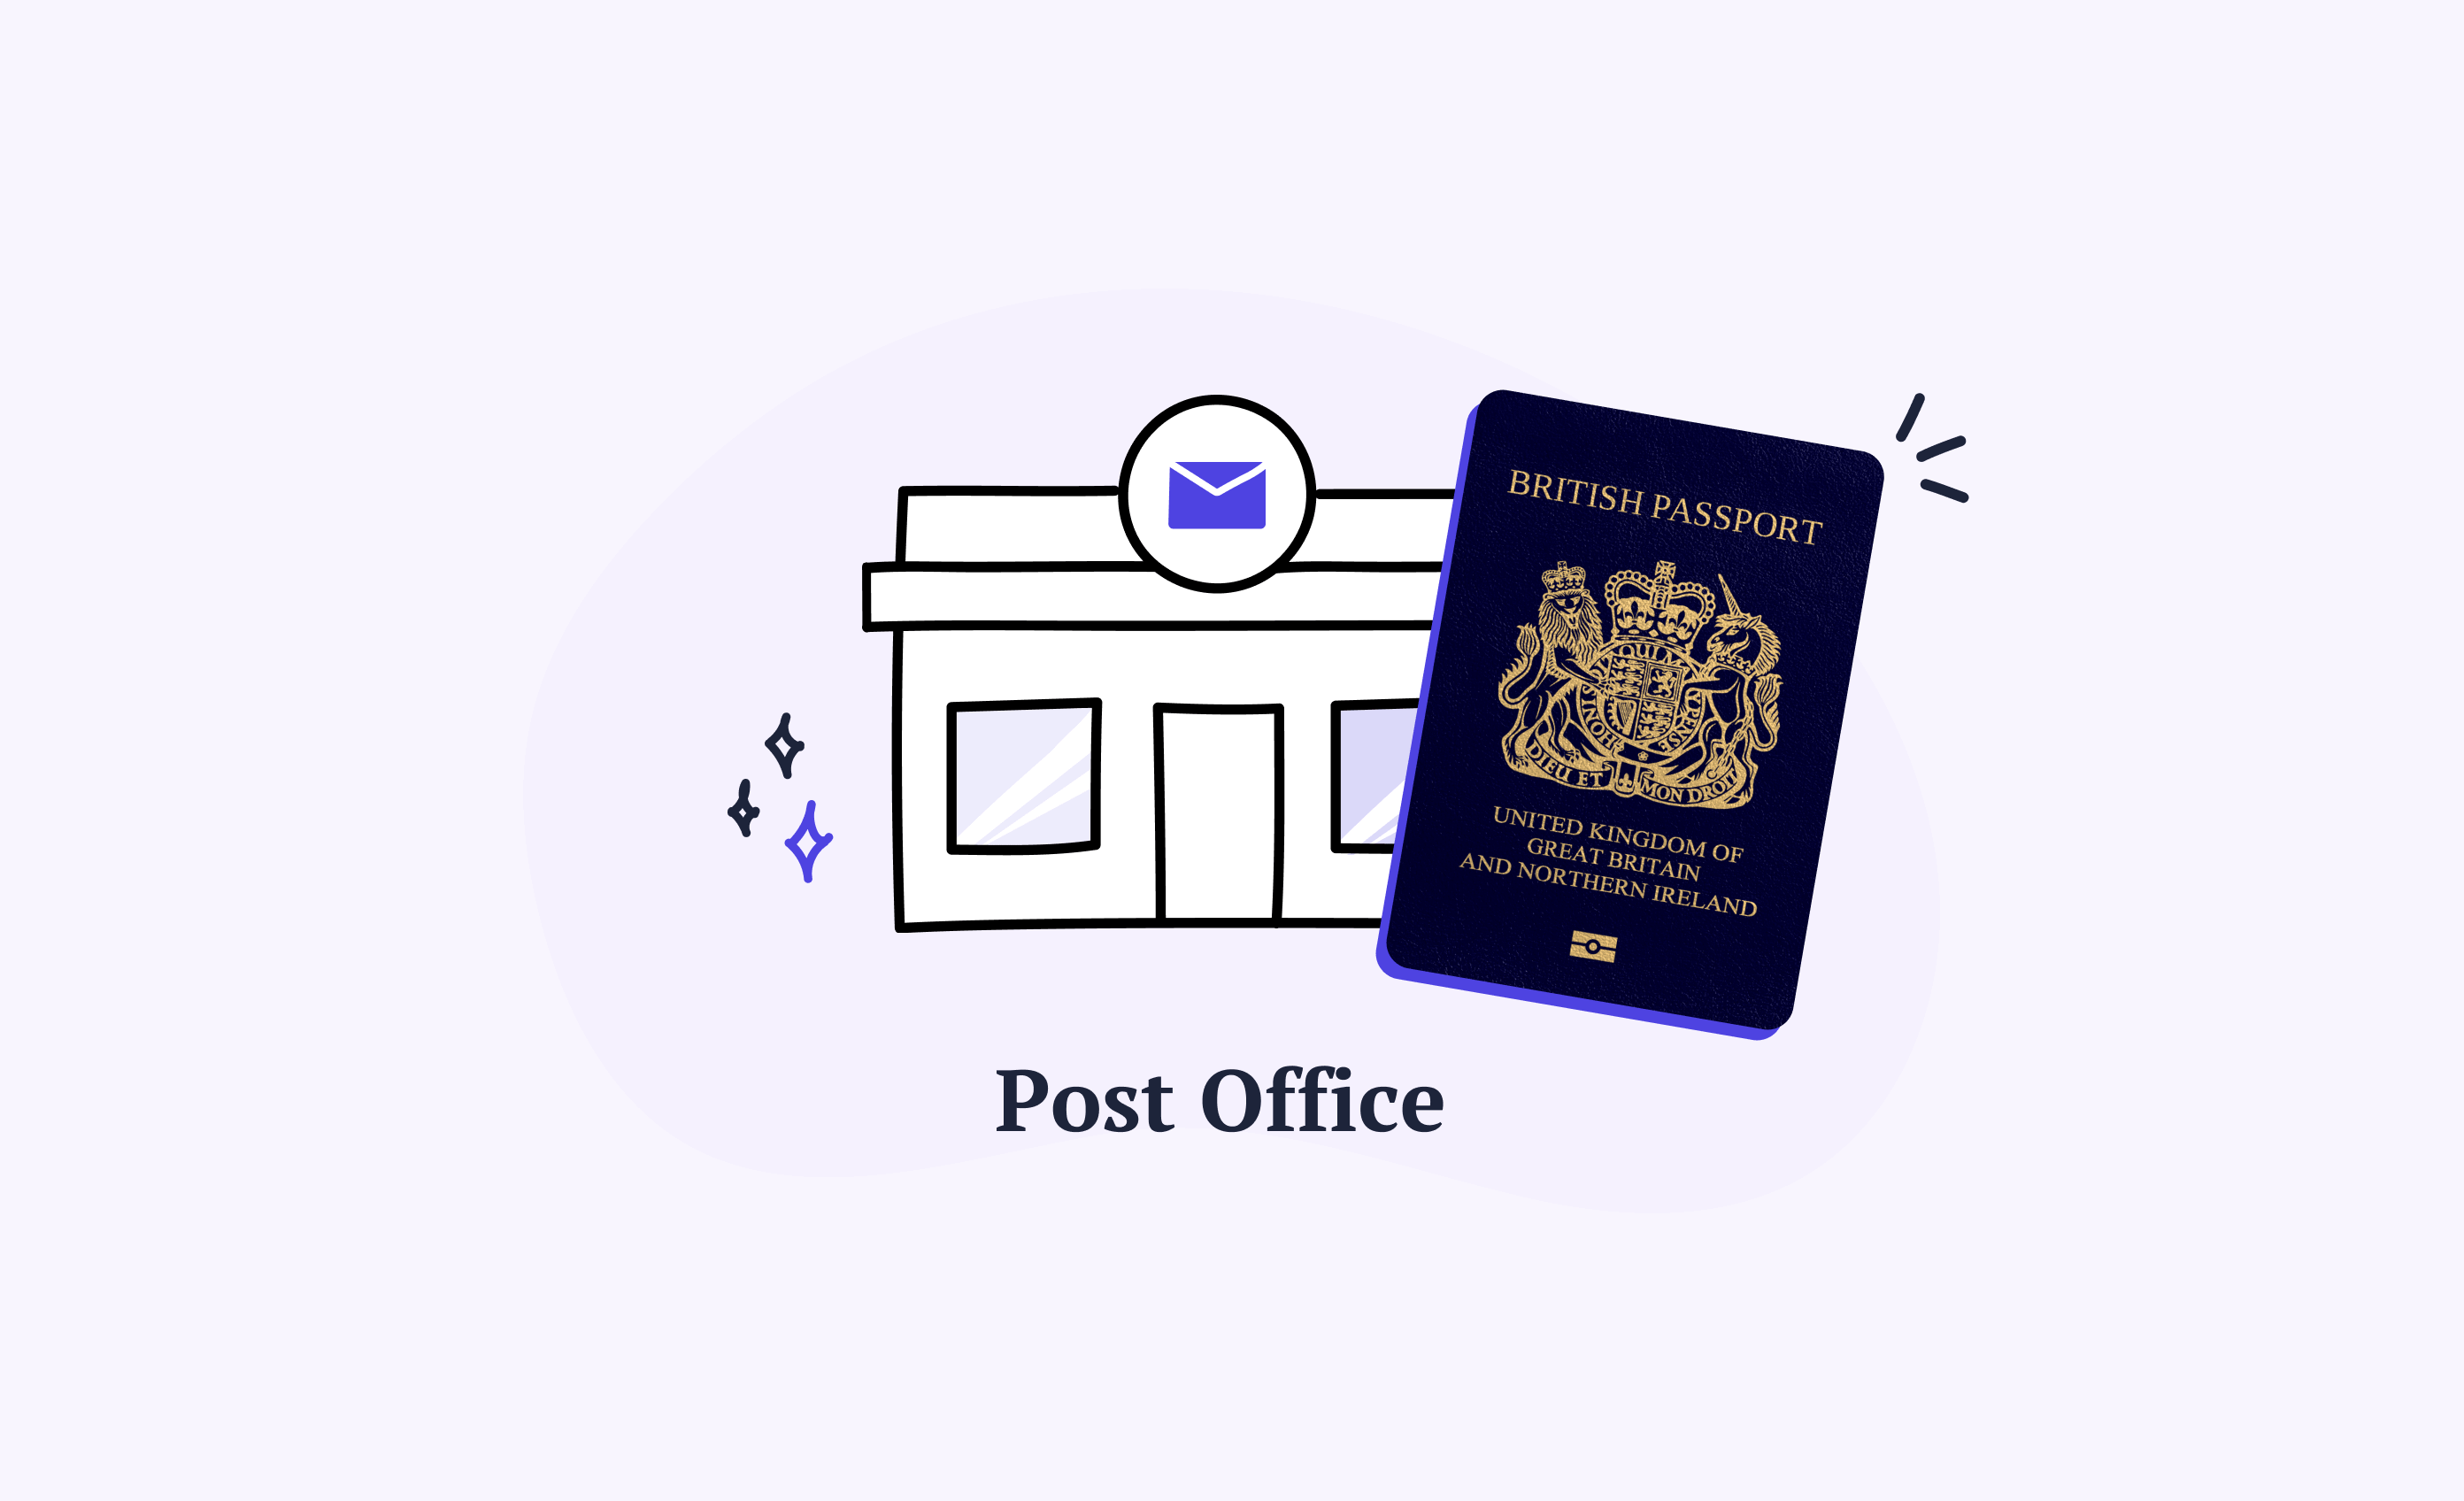 Passport applications and renewals at the post office.